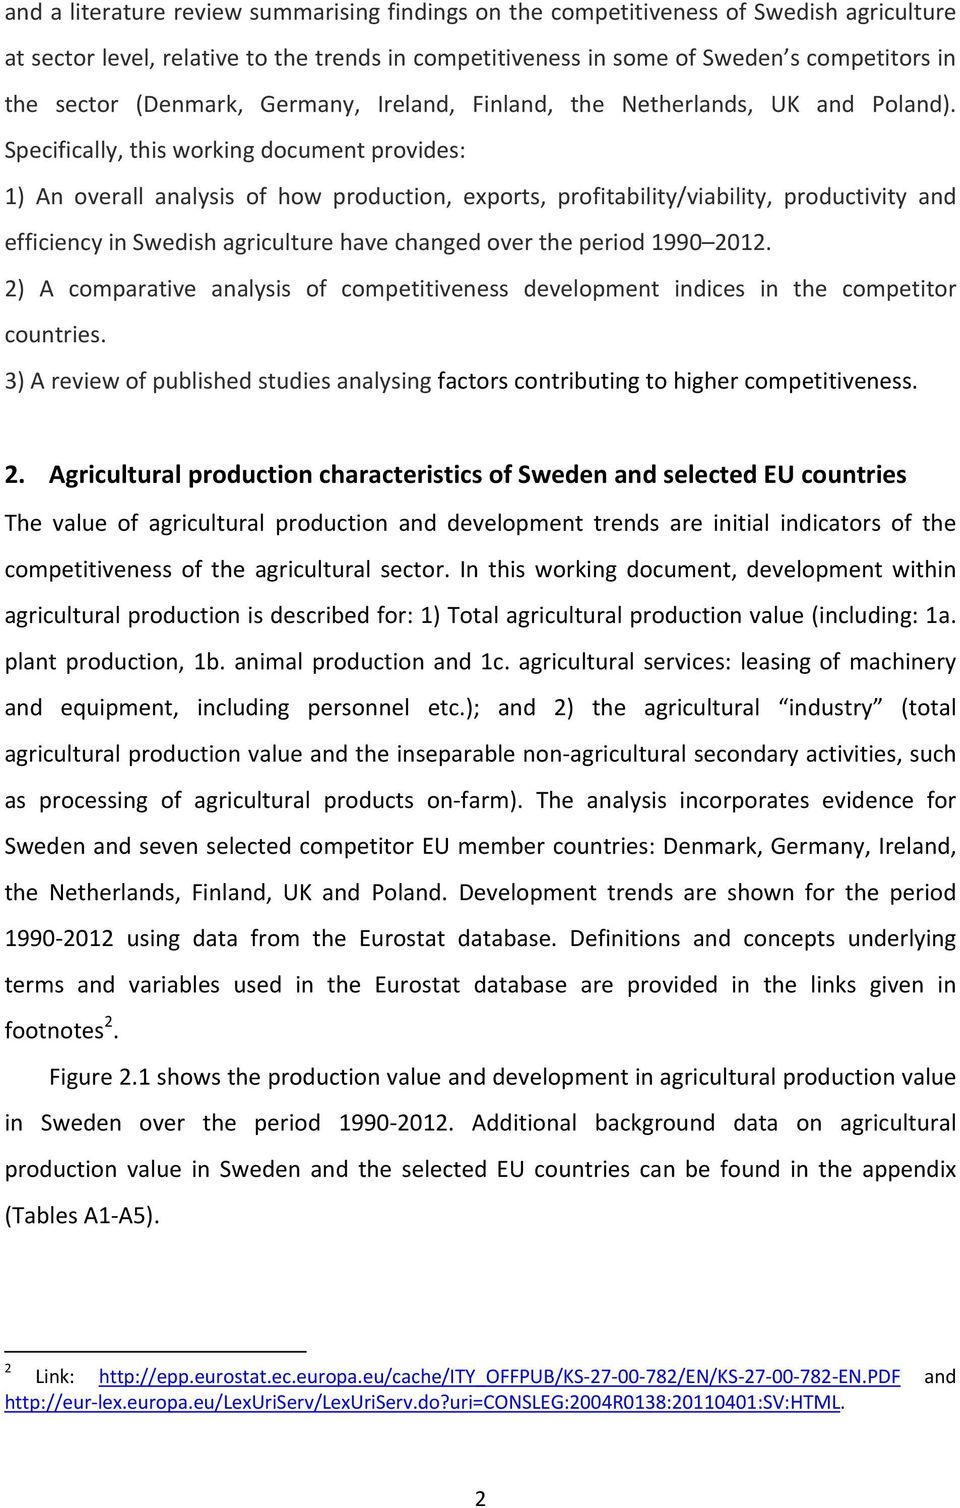 Specifically, this working document provides: 1) An overall analysis of how production, exports, profitability/viability, productivity and efficiency in Swedish agriculture have changed over the